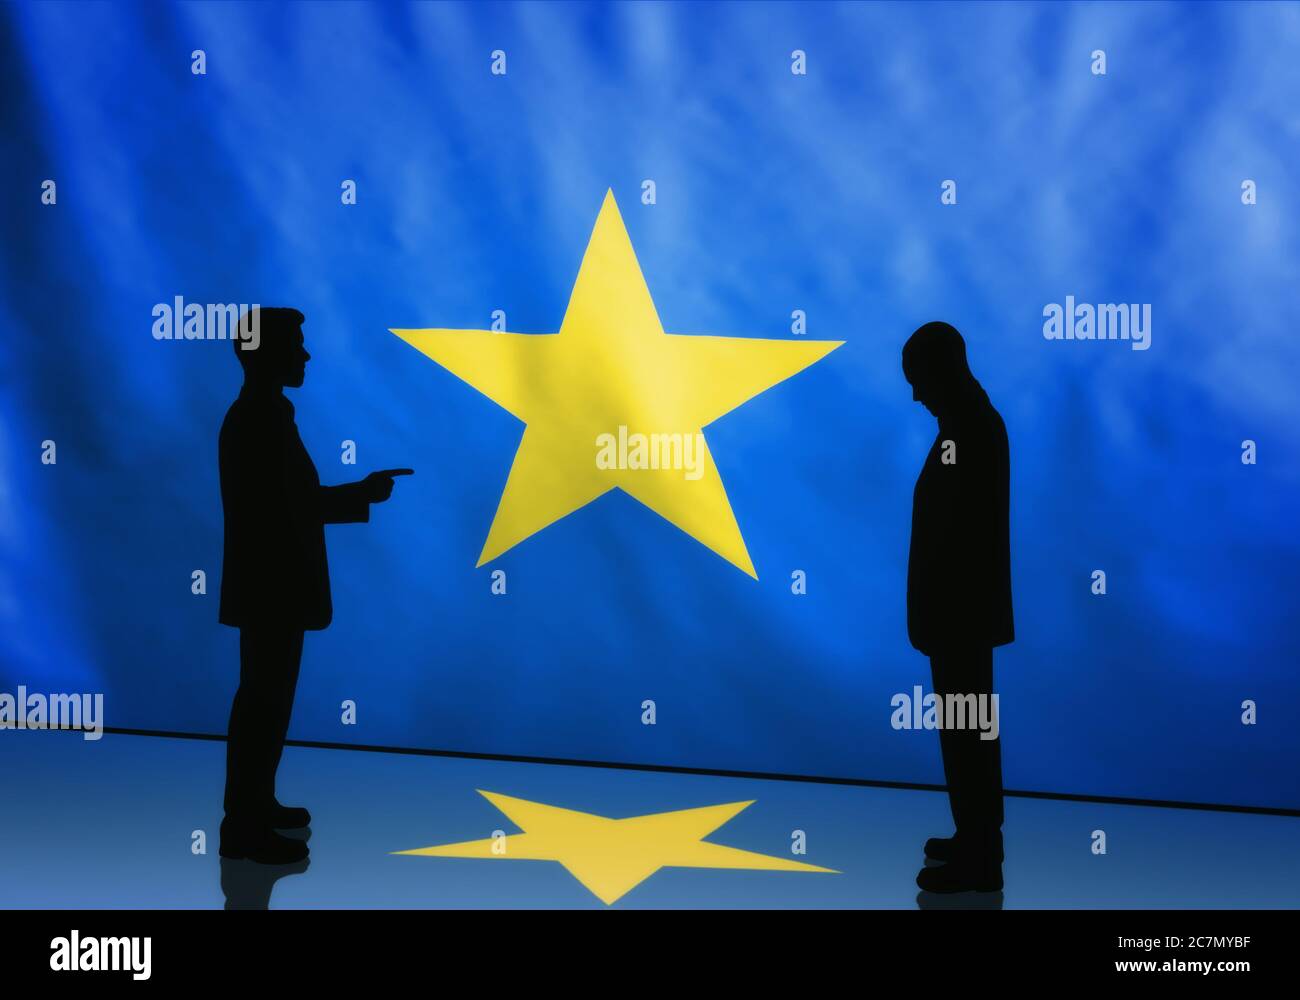 Silhouette of man pointing at other man against flag of Belgian Congo, concept of blaming Belgium and demanding apologies for atrocities during Coloni Stock Photo